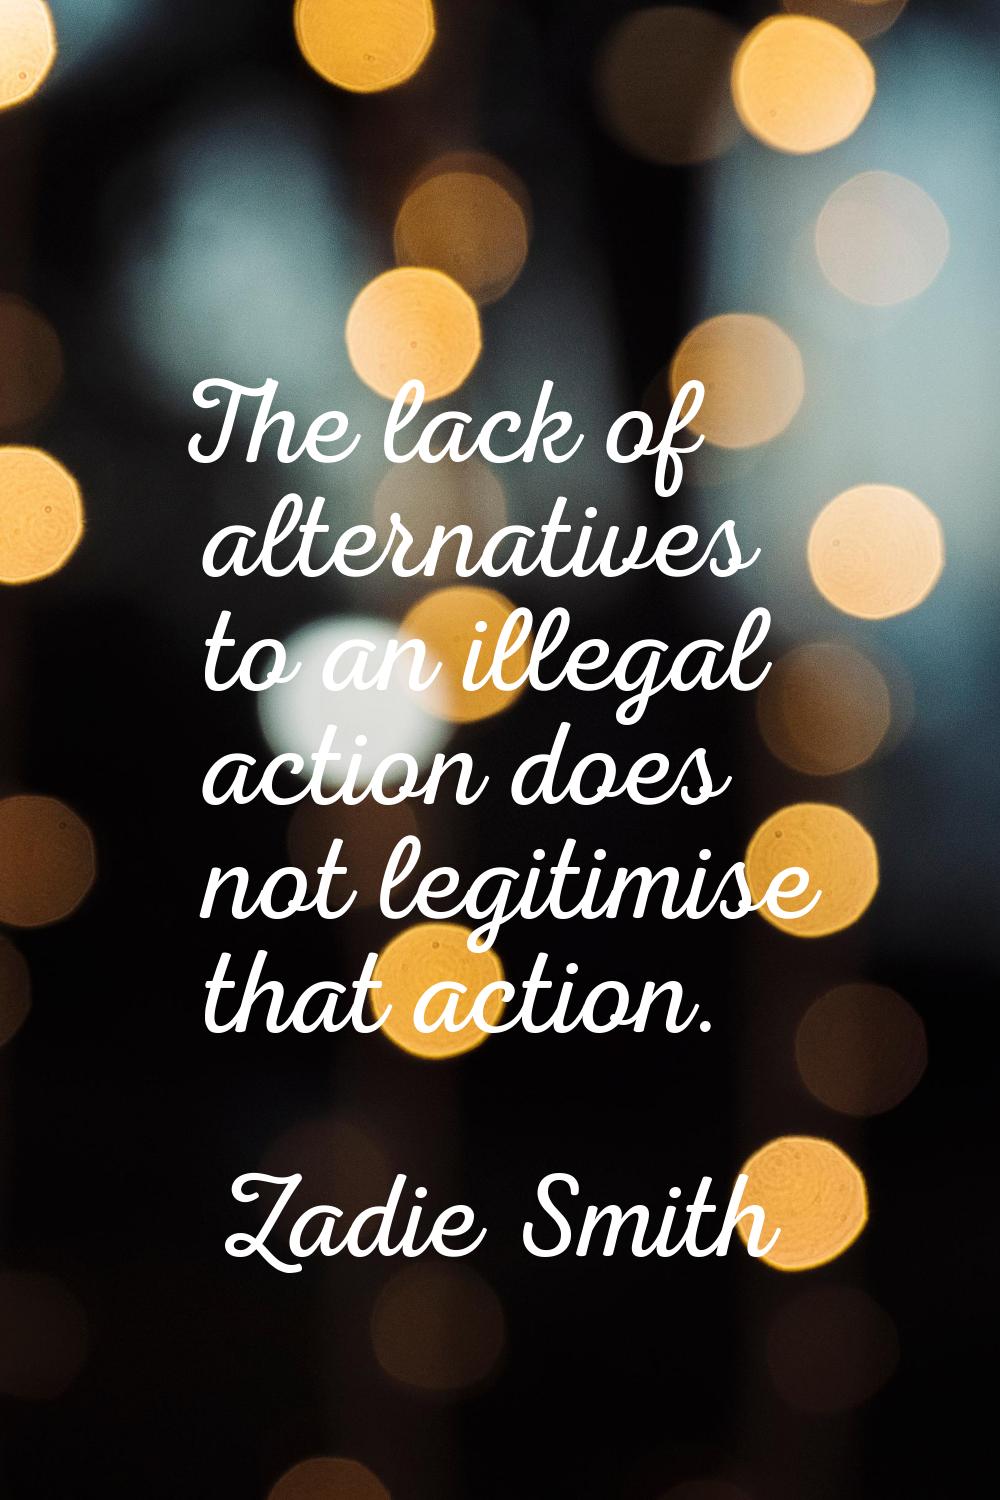 The lack of alternatives to an illegal action does not legitimise that action.